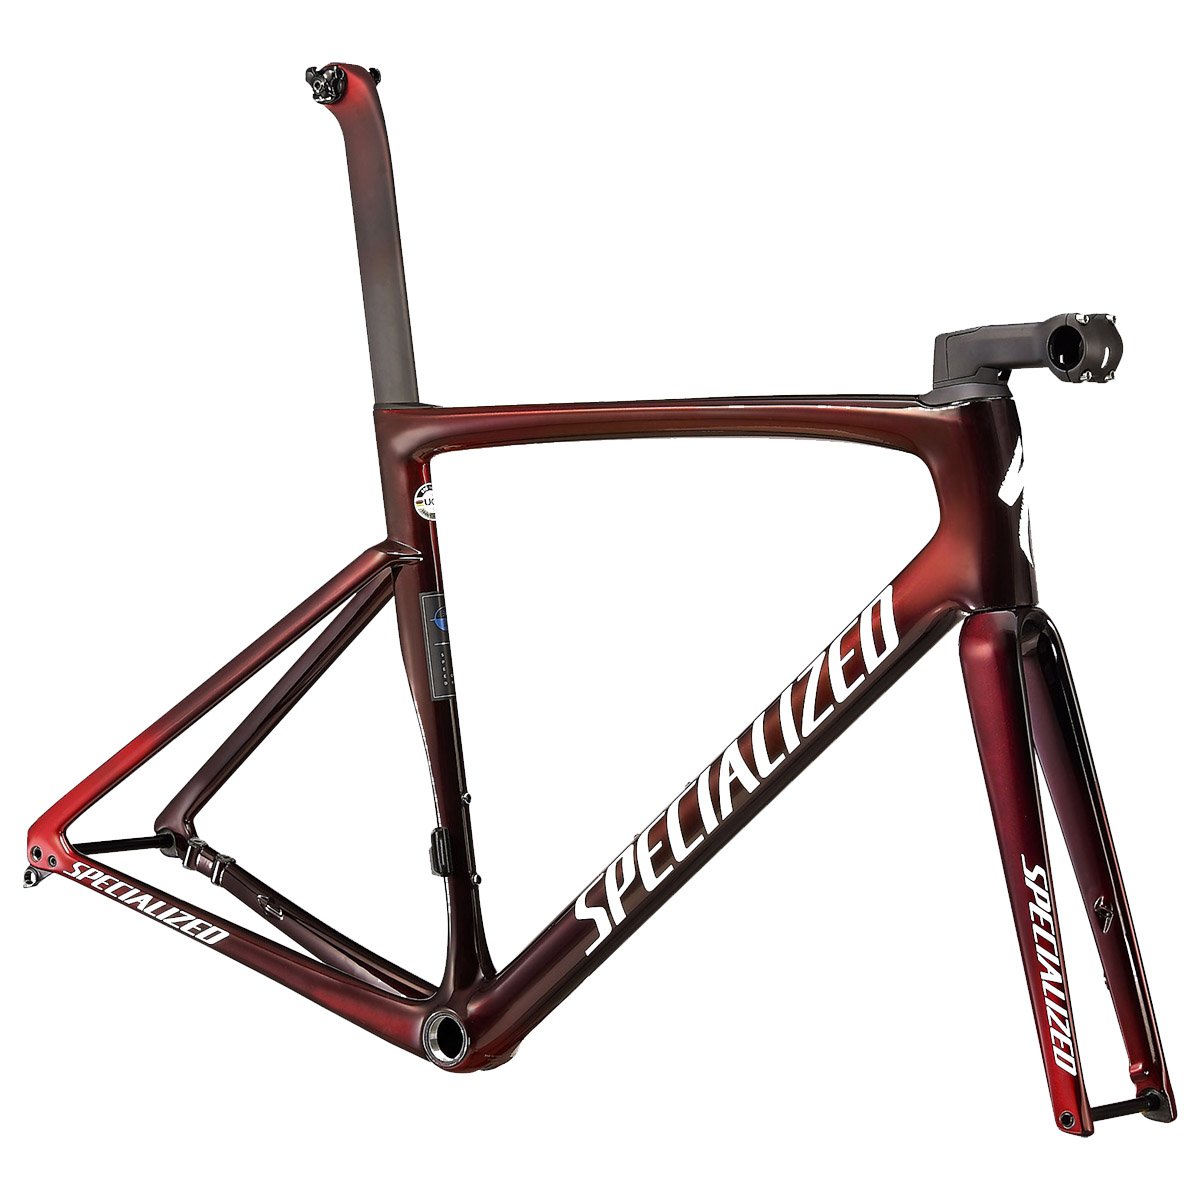 CADRE SPECIALIZED TARMAC SL7 S-WORKS SPEED OF LIGHT ROUGE/CHAMELEON 58CM